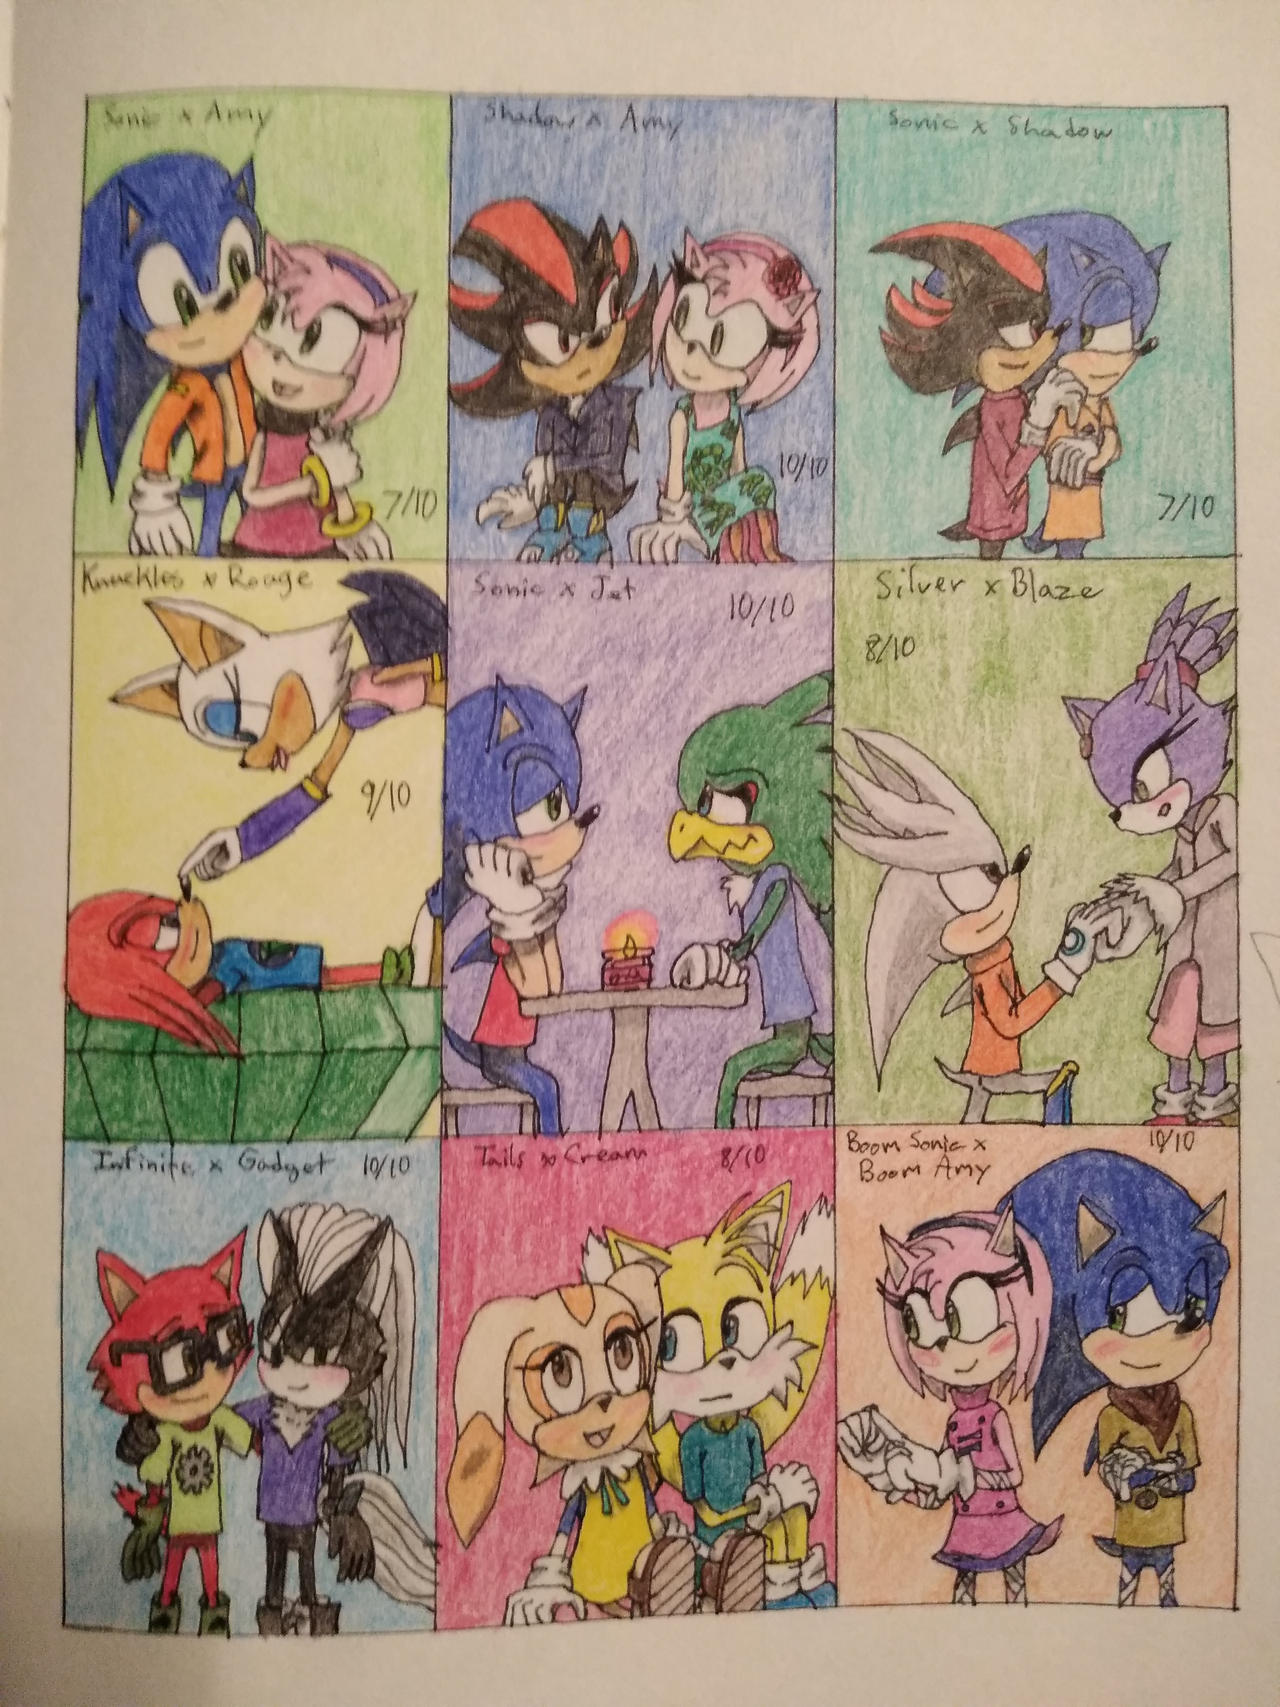 Sonic x Silver x Shadow on A-A-Sonic-Shipping - DeviantArt